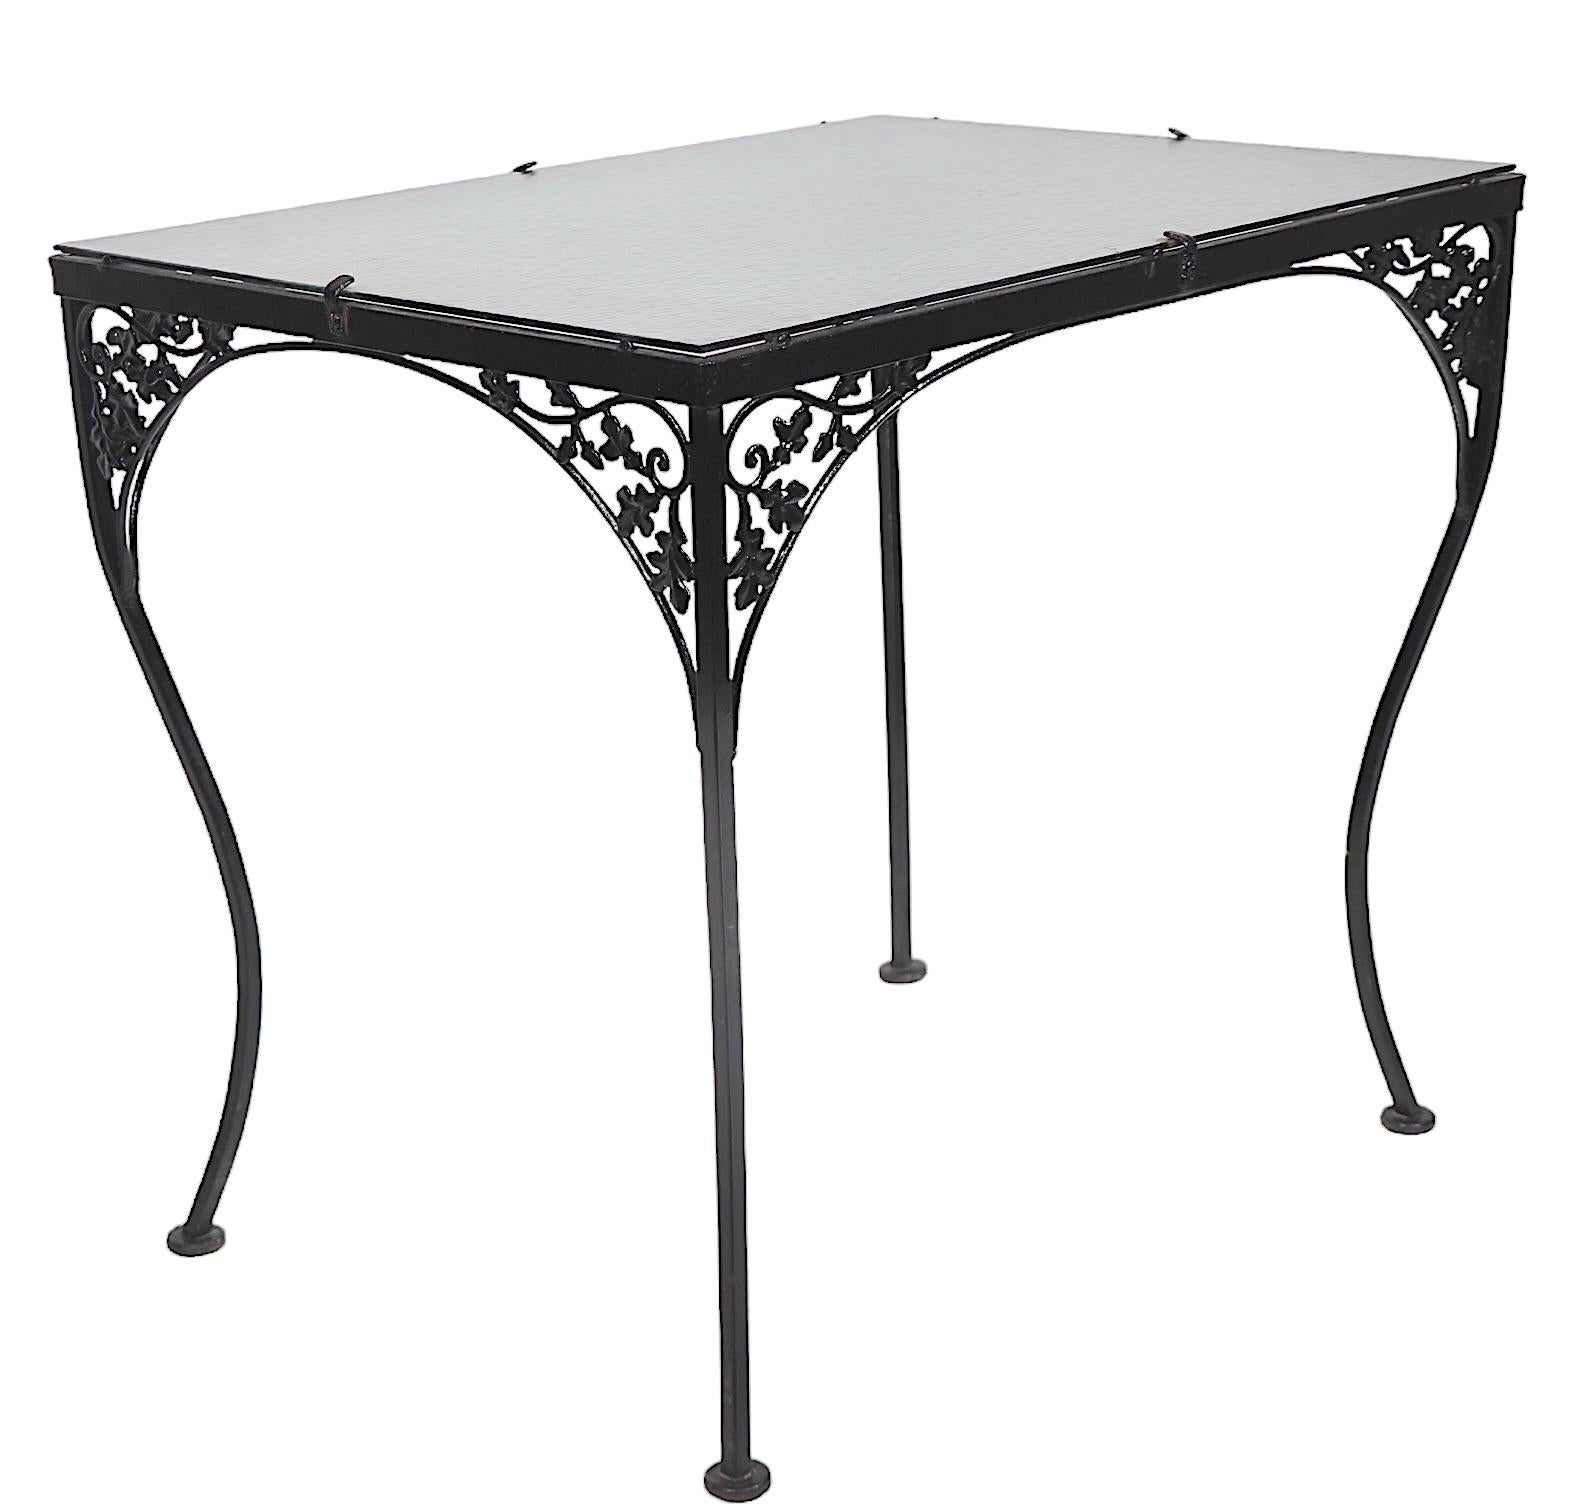 American Ornate Wrought Iron and Glass Garden Patio Poolside Dining Table att. to Woodard For Sale